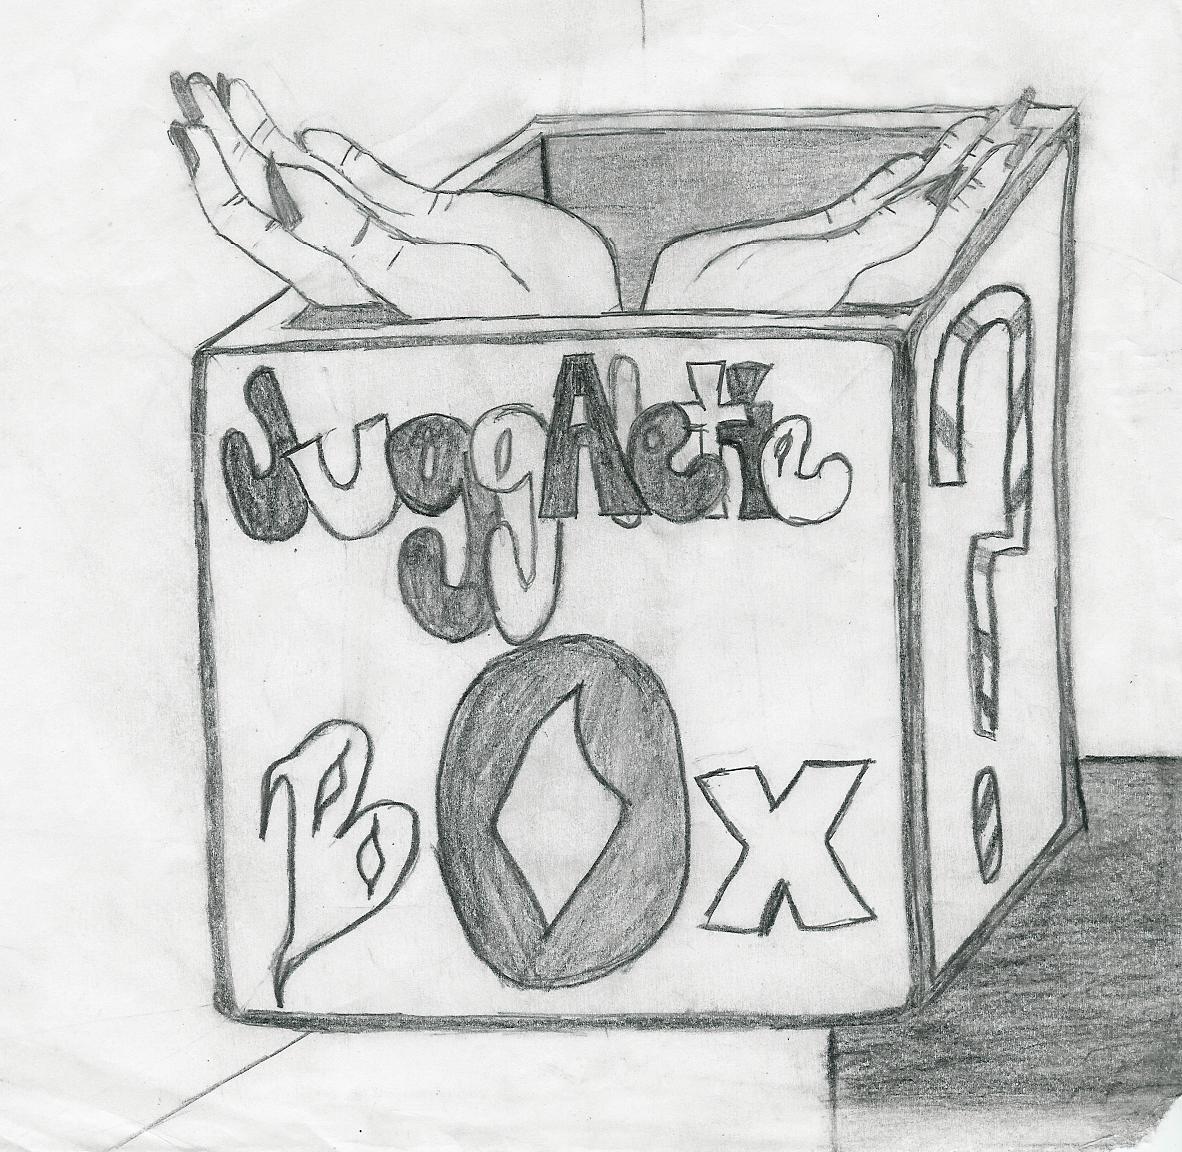 Juggalette Box by Wicked_Illusions